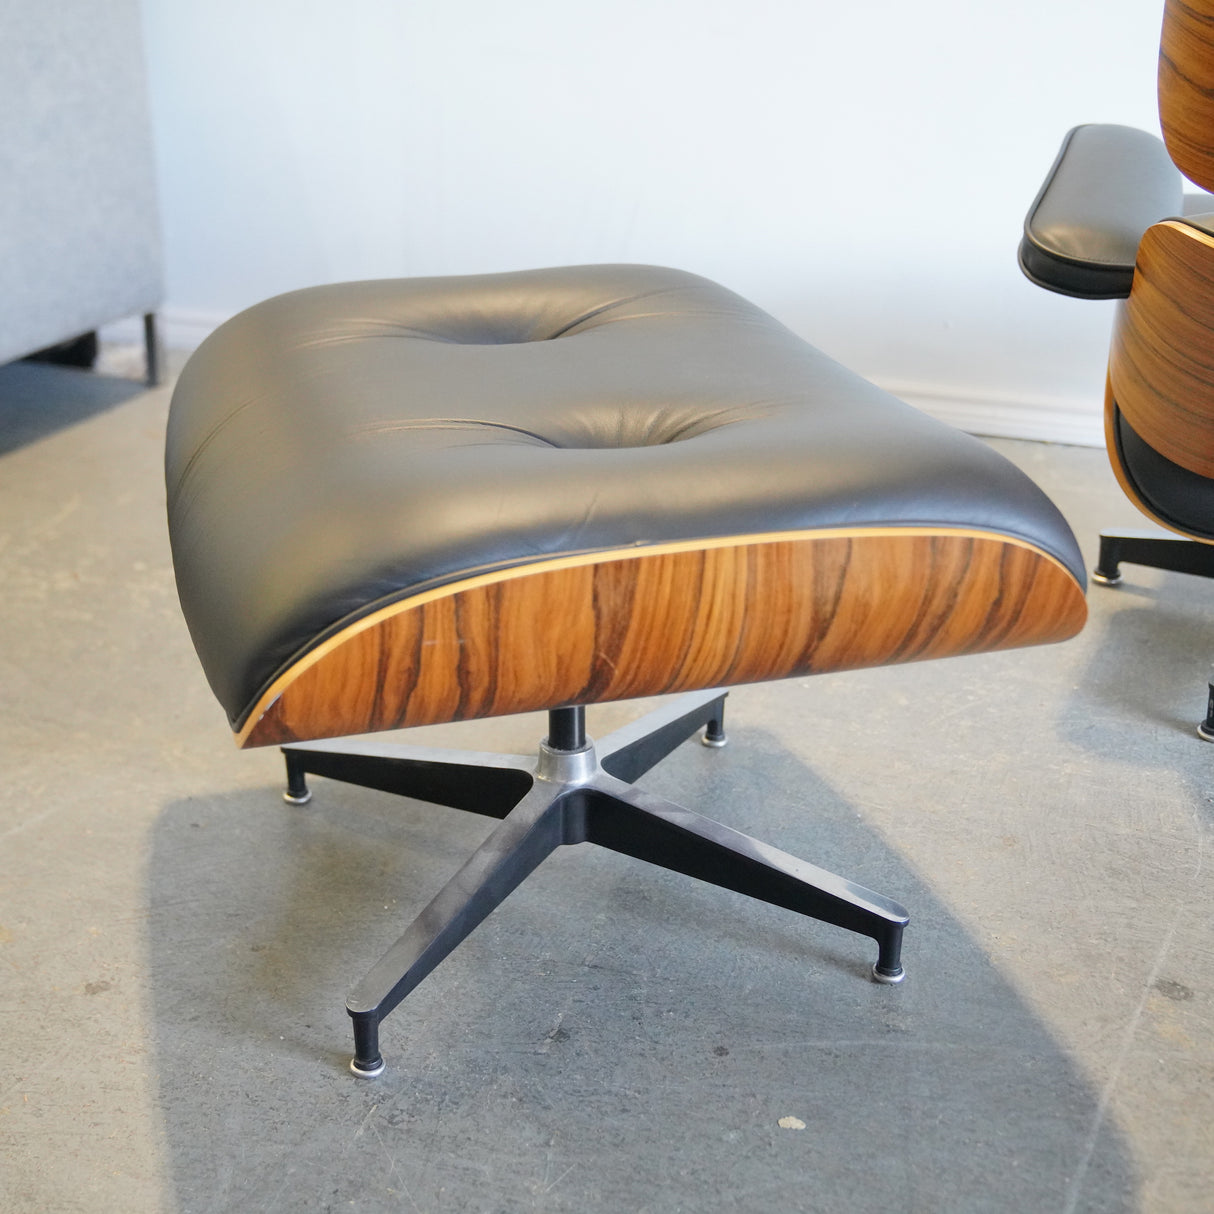 Authentic! Herman Miller Eames 50th Anniversary Lounge Chair and Ottoman